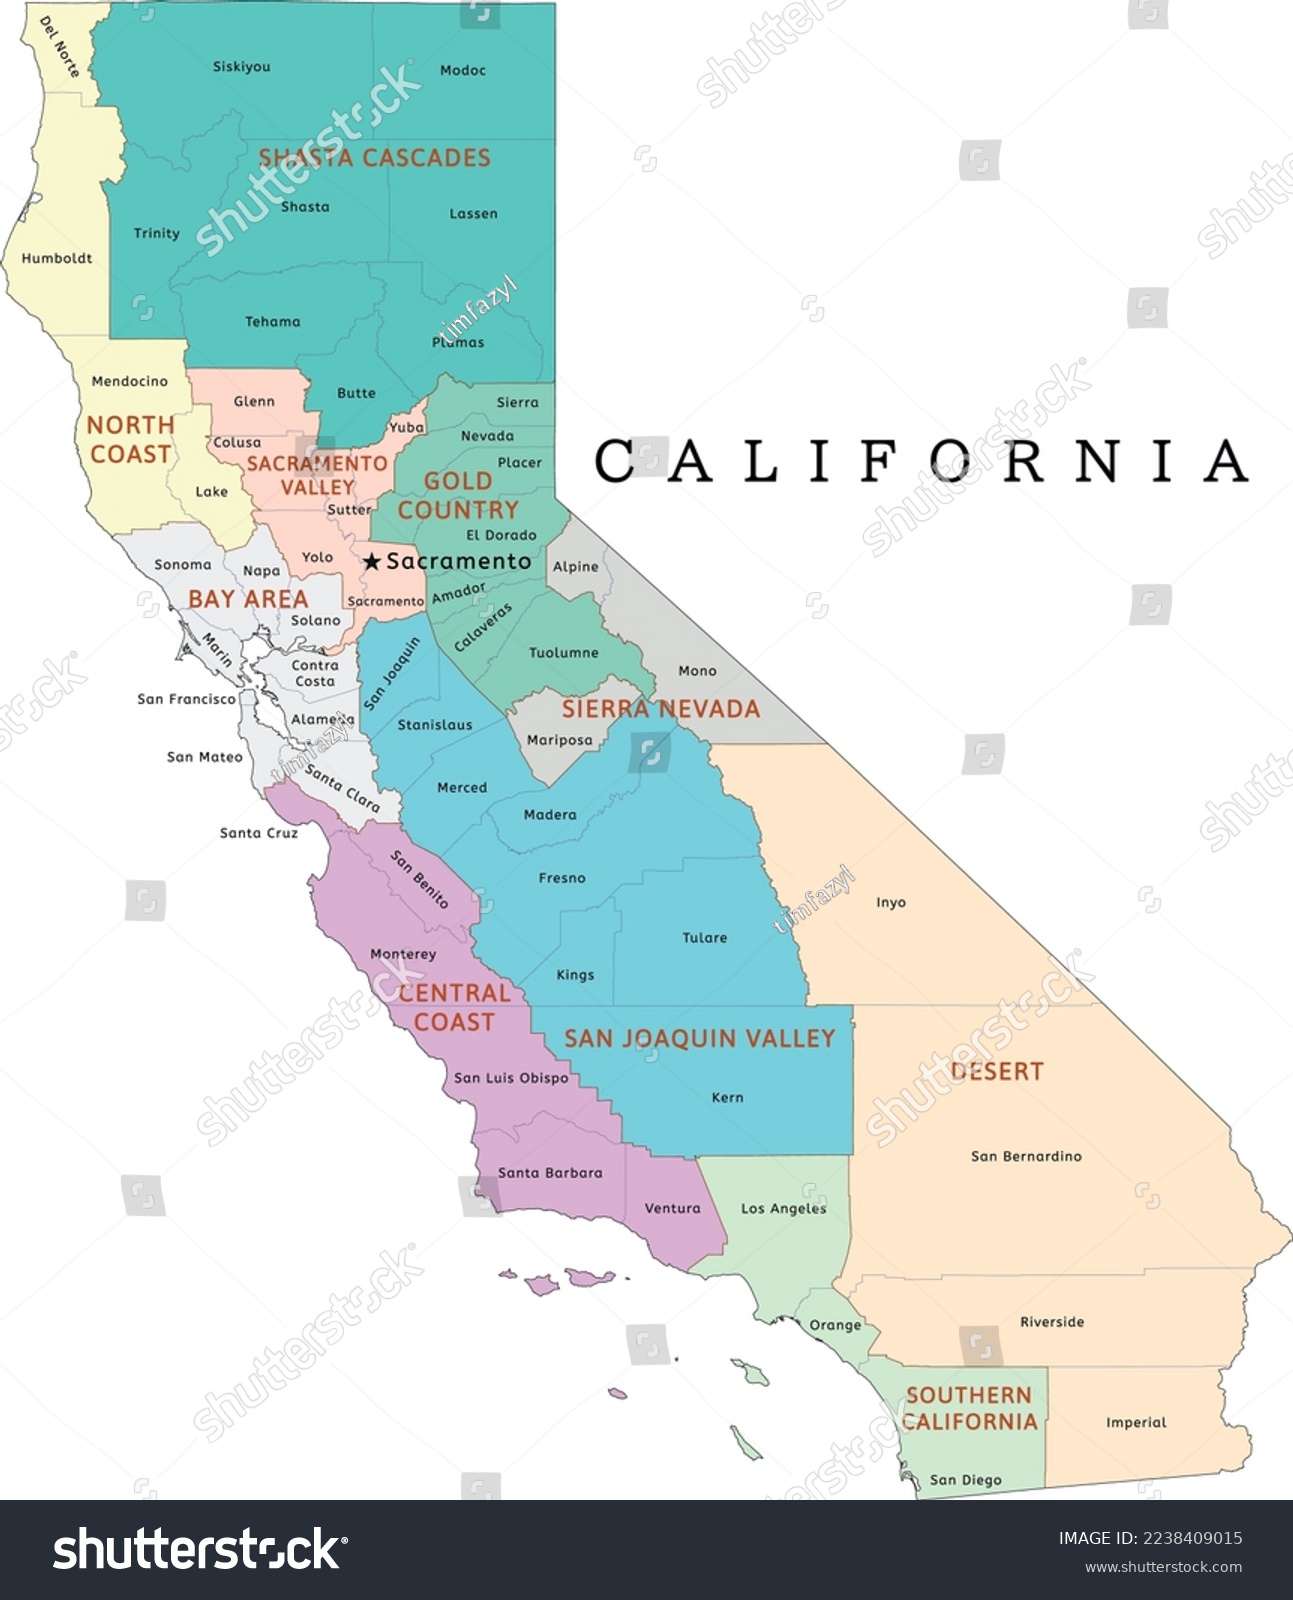 California state regions map with counties. Colored. Vectored #2238409015